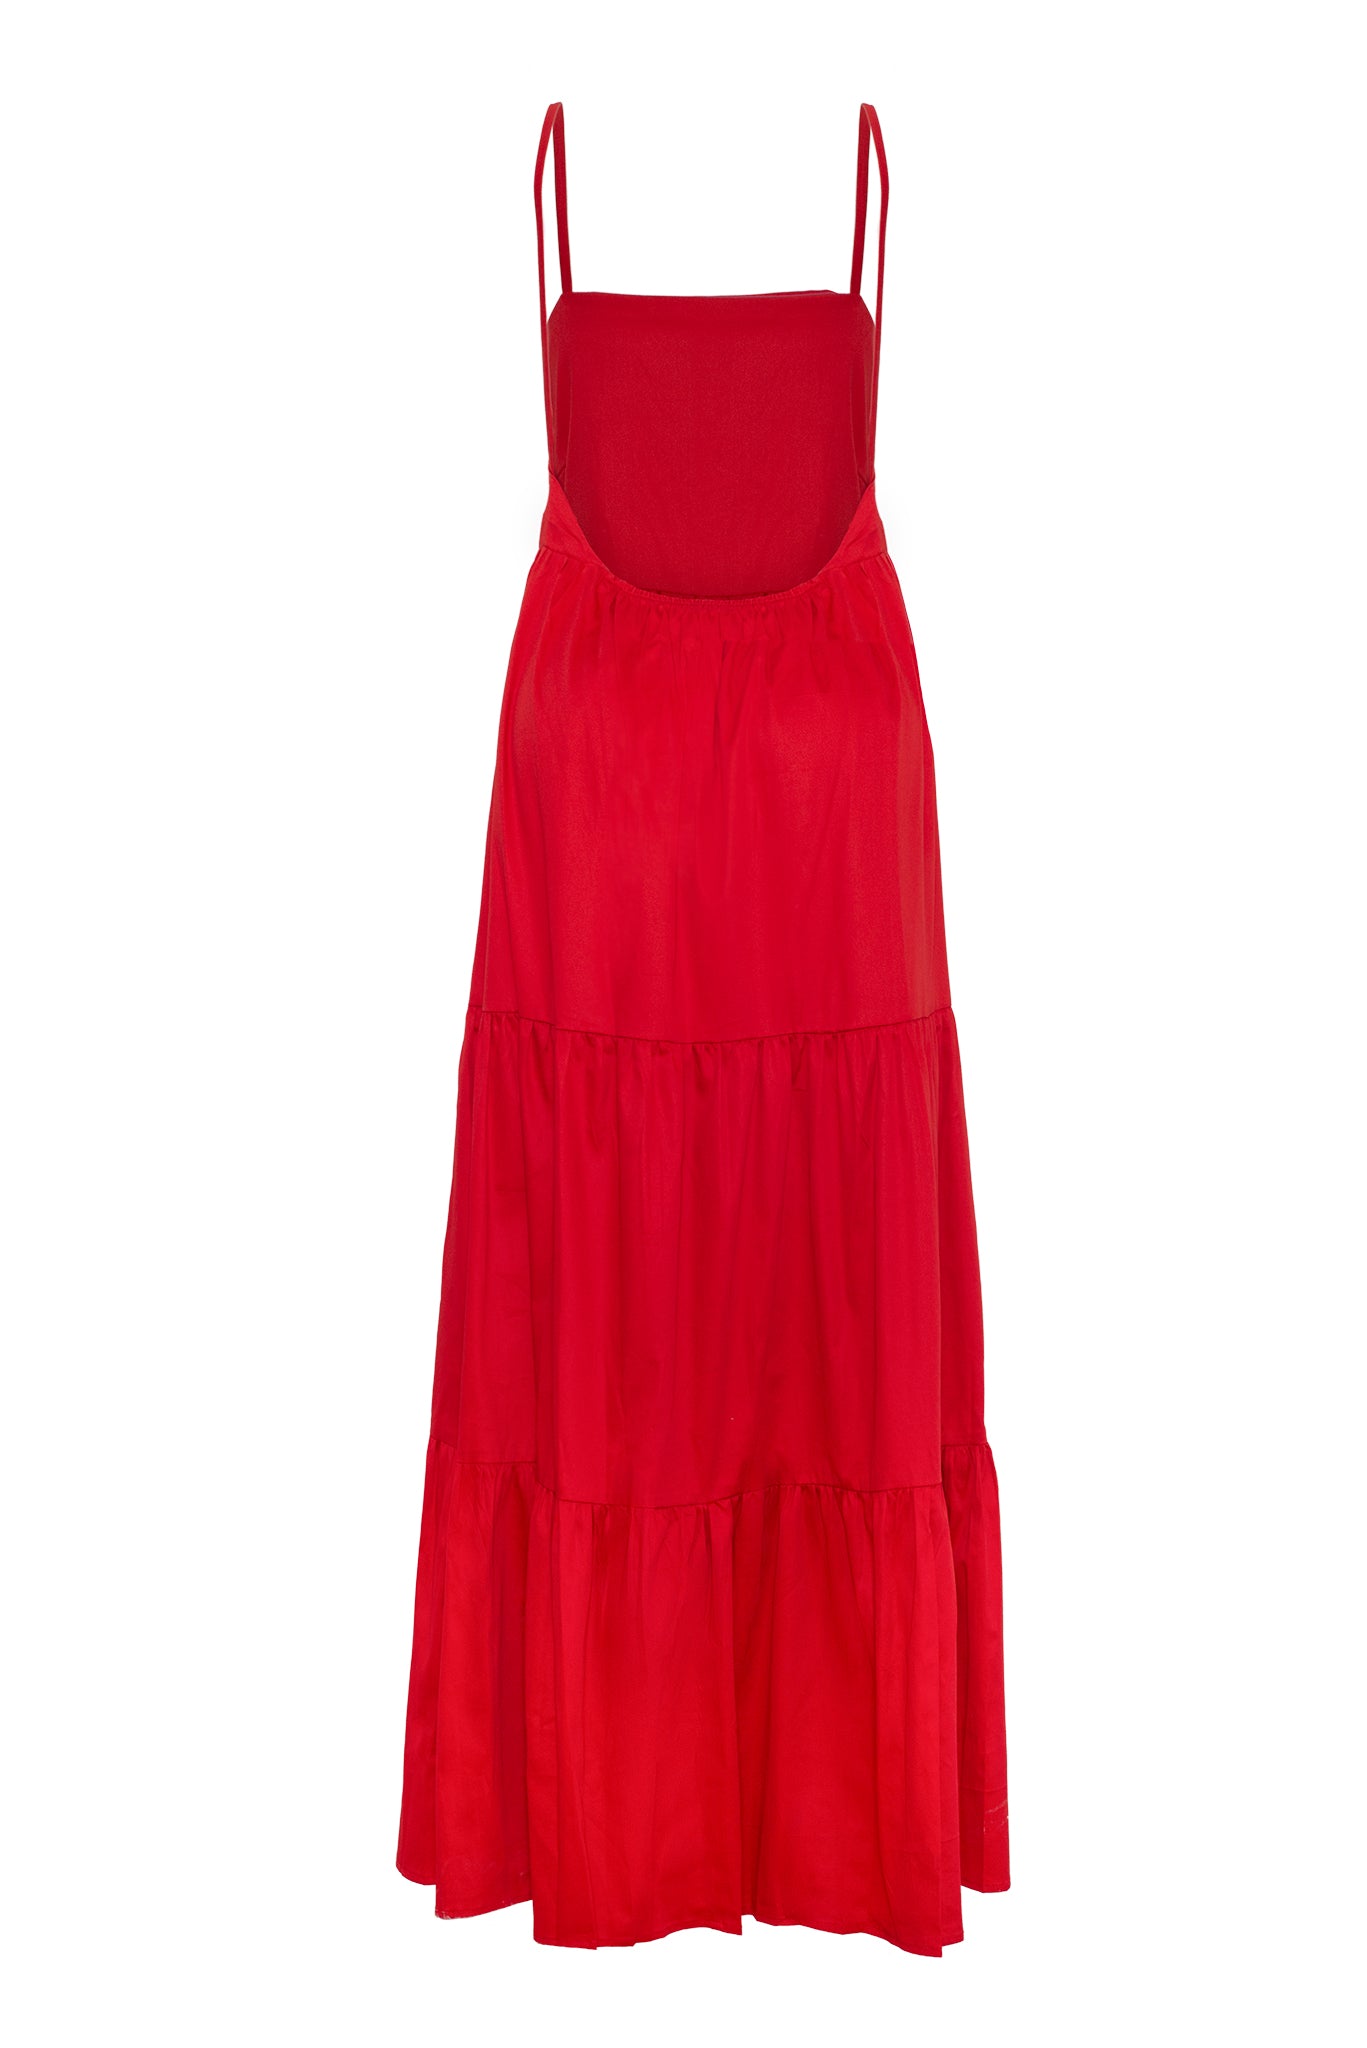 DHALI DRESS IN ORGANIC RED COTTON